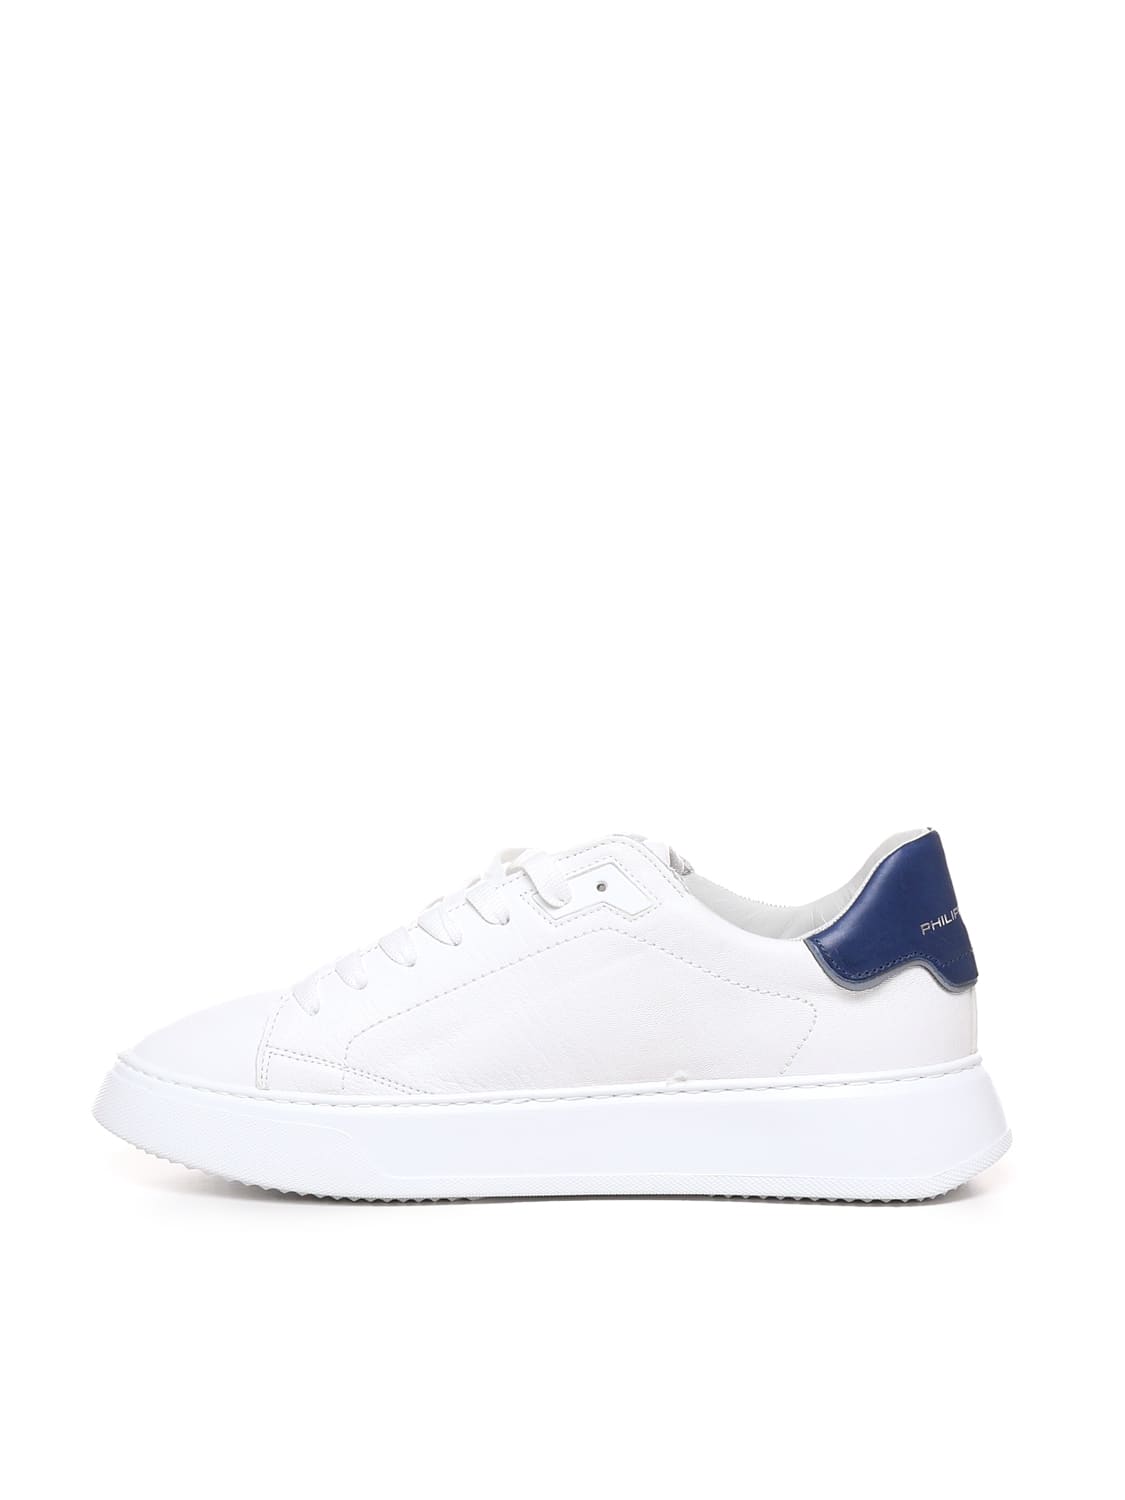 Shop Philippe Model Paris Leather Sneakers In White, Blue